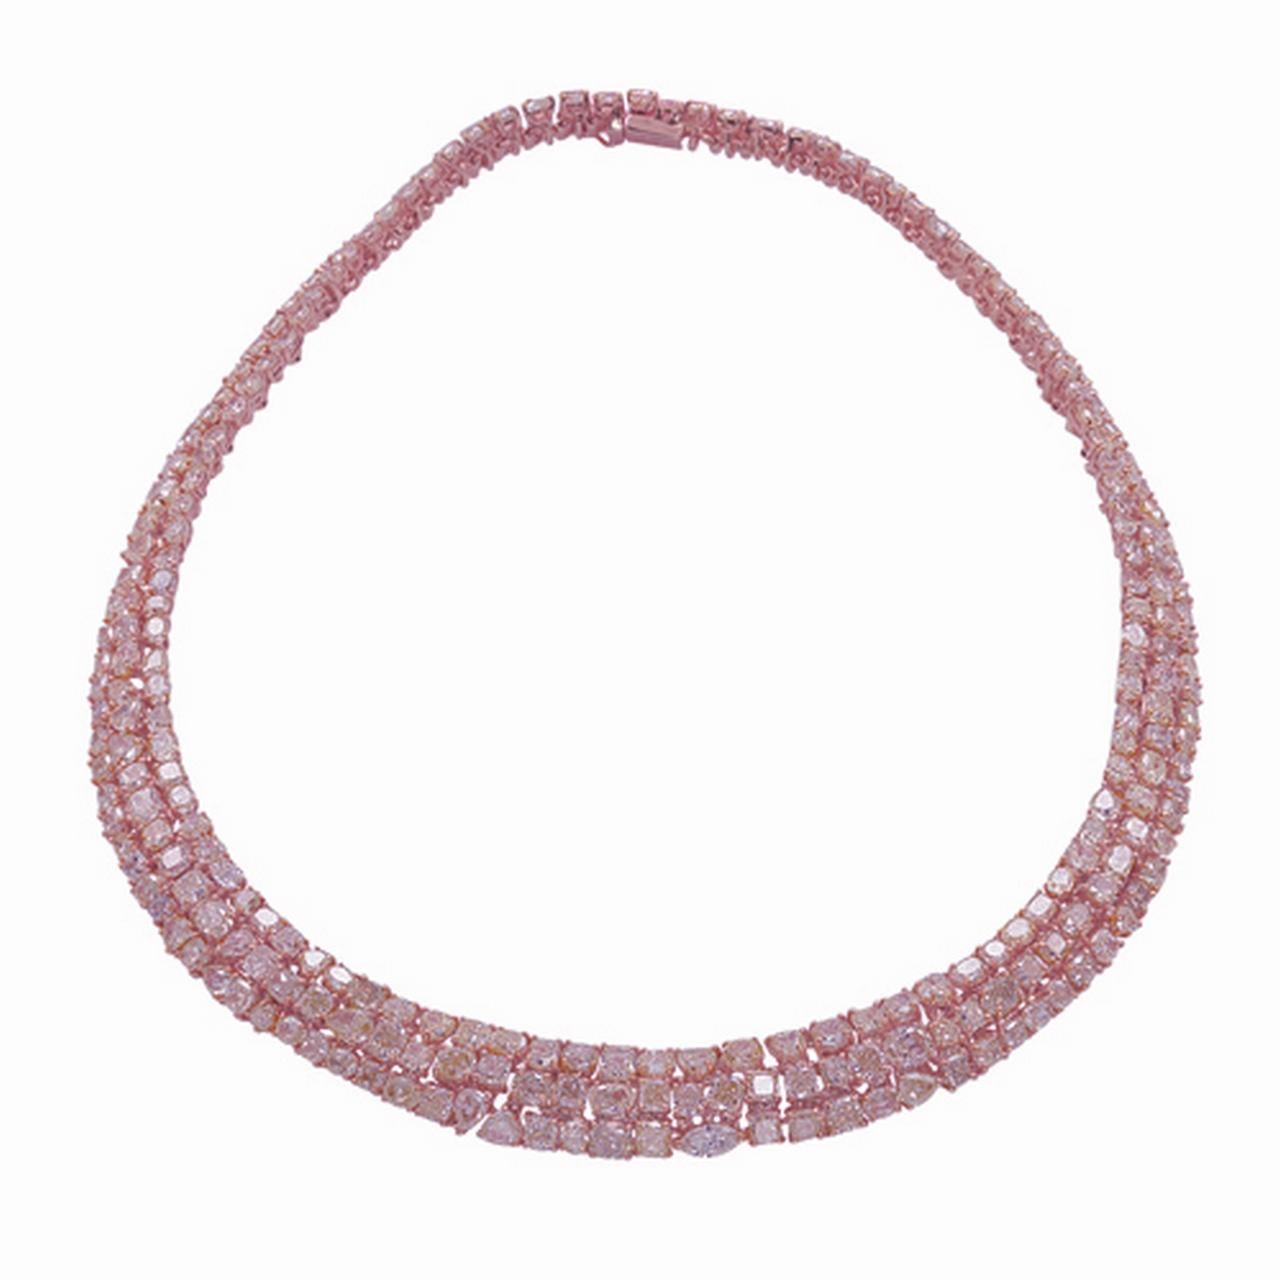 The Following Item we are offering is this Extremely Rare Beautiful 18KT Gold Fine Rare Large Pink Diamond Elaborate Masterpiece of a Necklace. This Magnificent Necklace is comprised of Rare Fine Large Gorgeous Glittering Fancy Pink Diamonds!!!